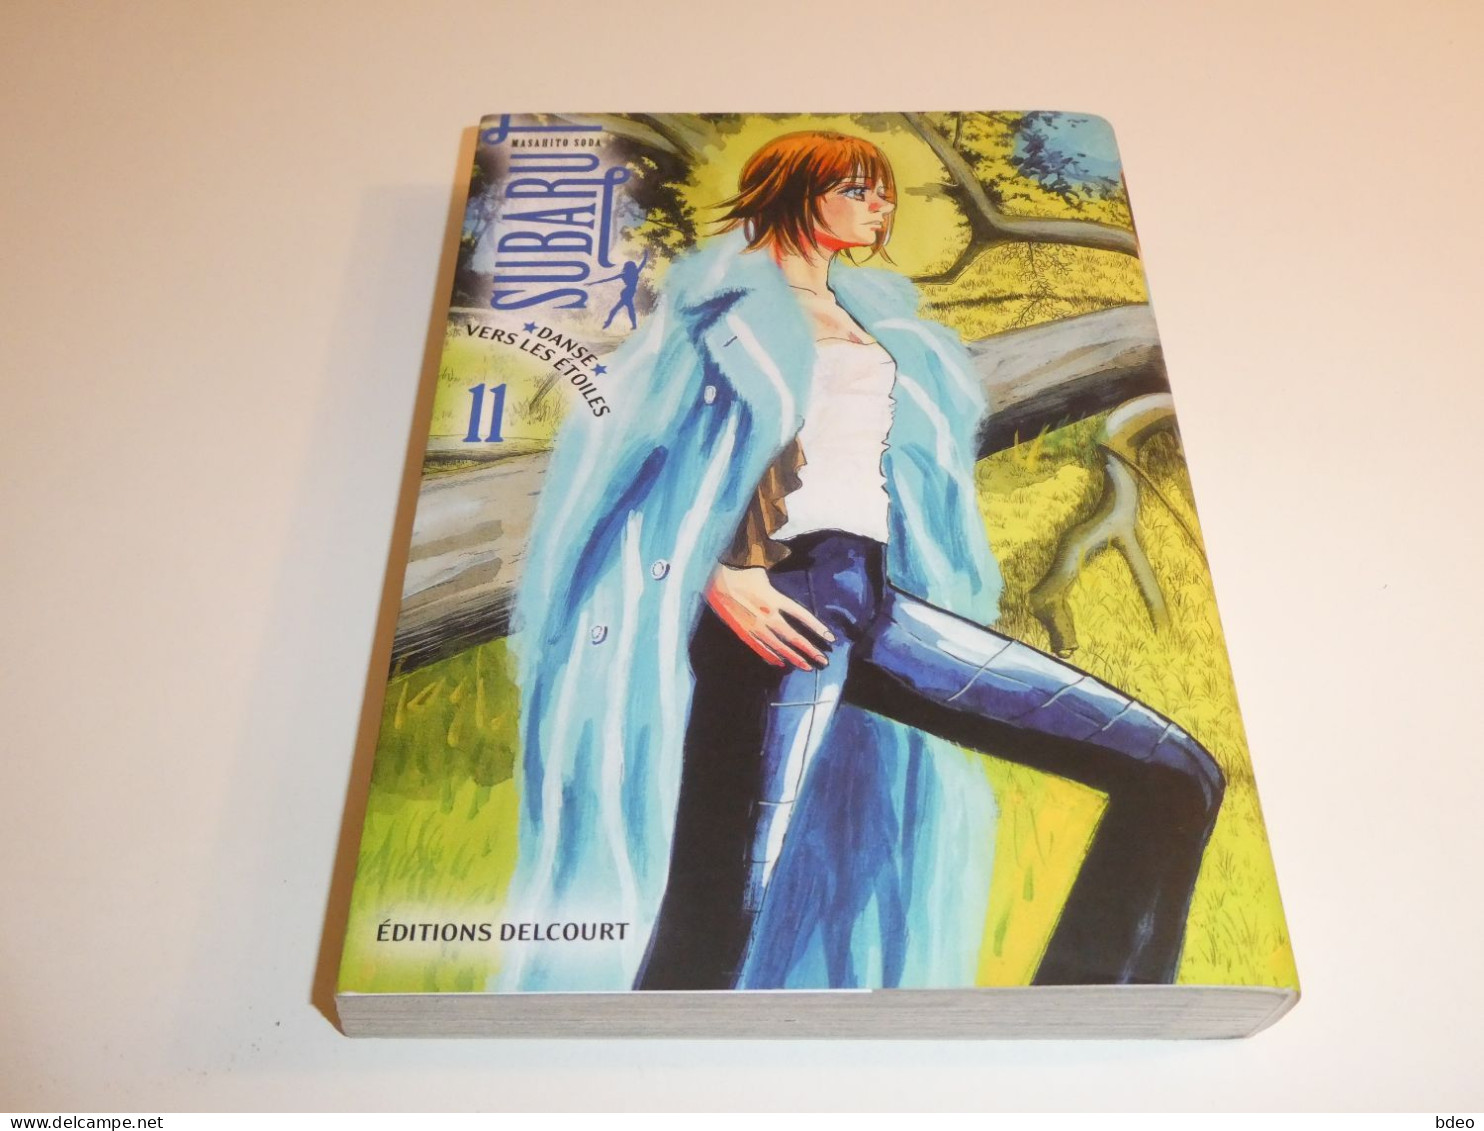 SUBARU : DANSE VERS LES TOILES TOME 11 / TBE - Mangas [french Edition]